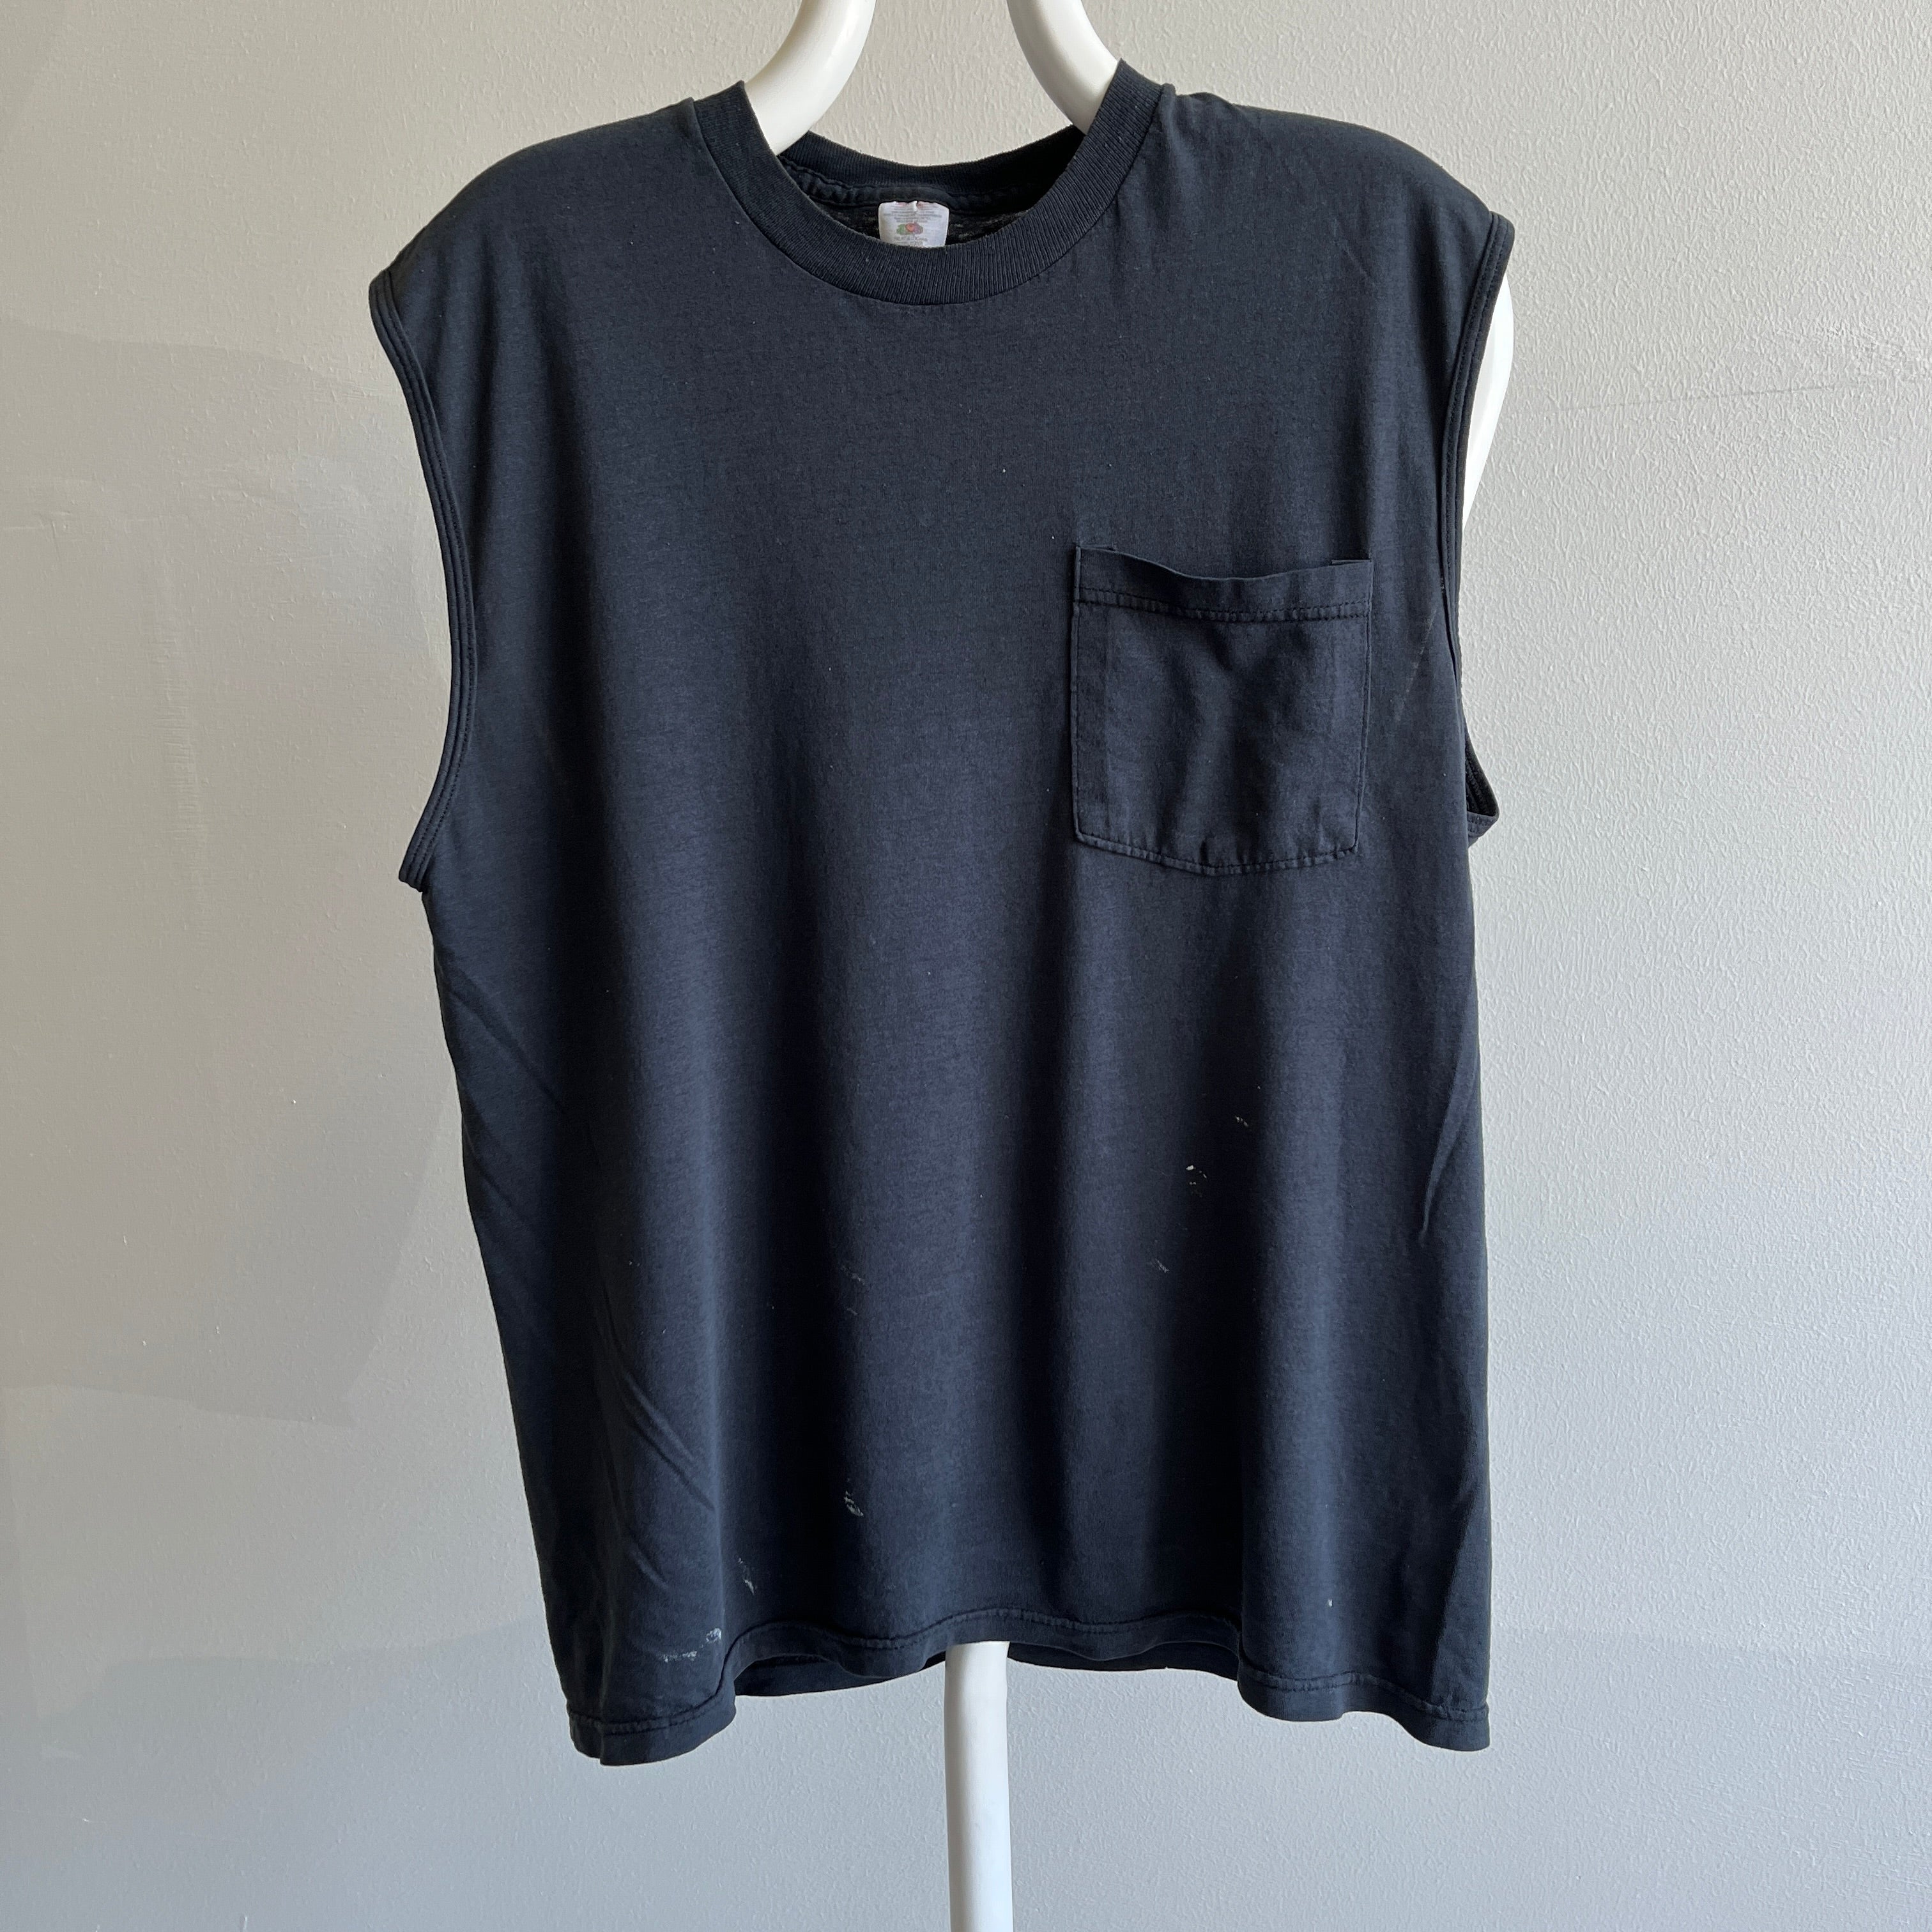 GG - 1990s Thinned Out FOTL Black Muscle Tank Top with Pocket